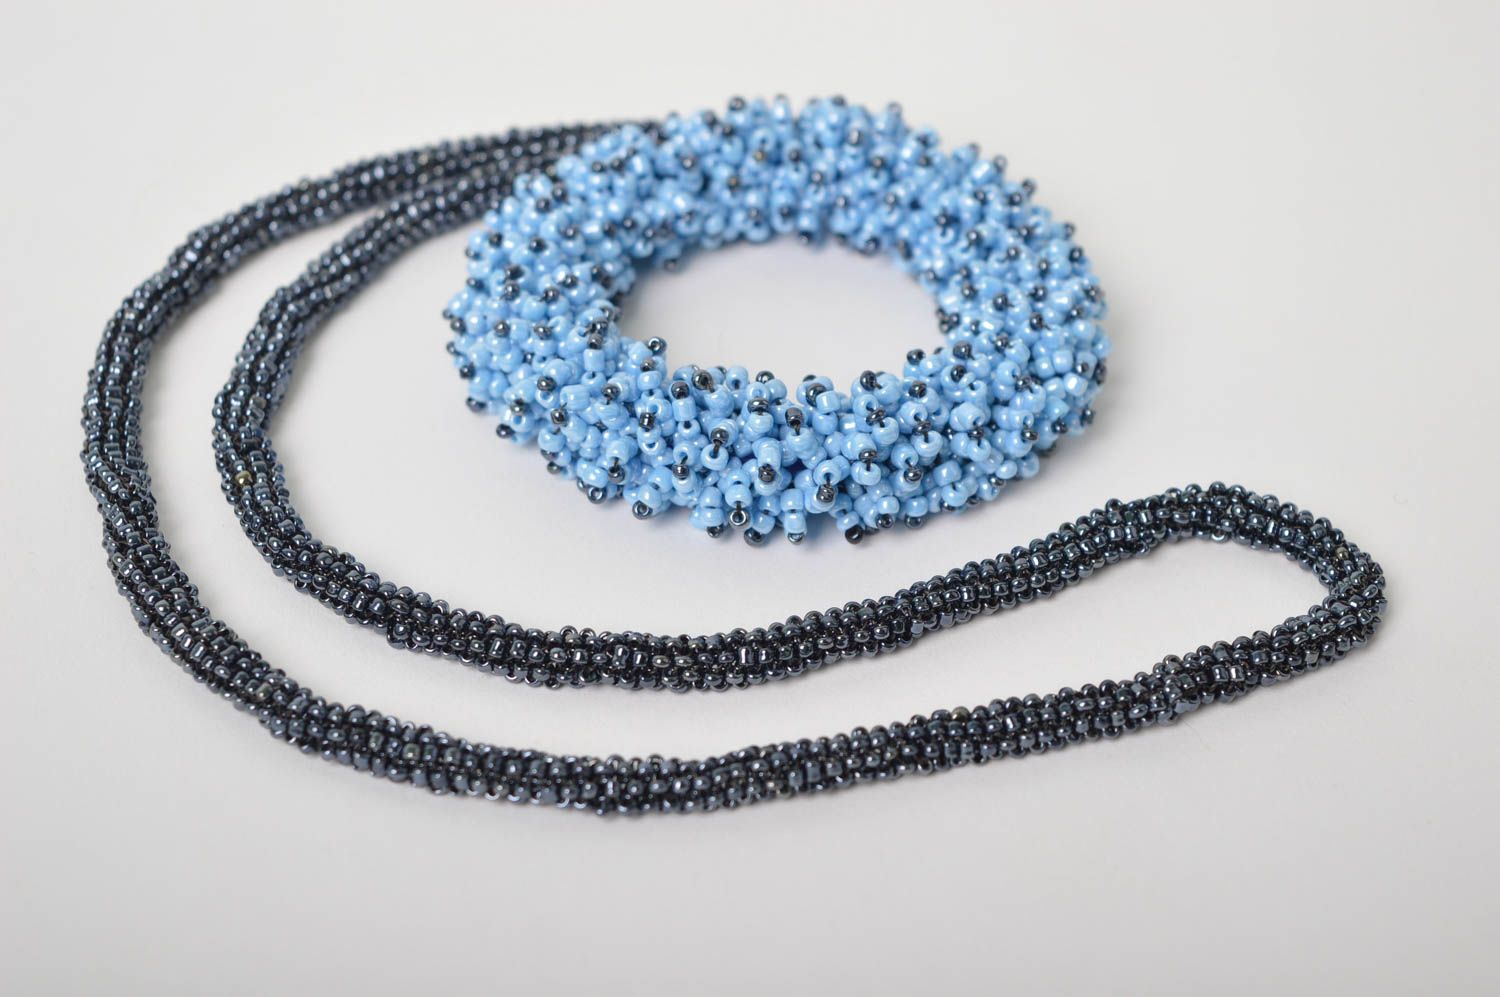 Stylish handmade beaded necklace cool jewelry woven bead necklace gifts for her photo 4